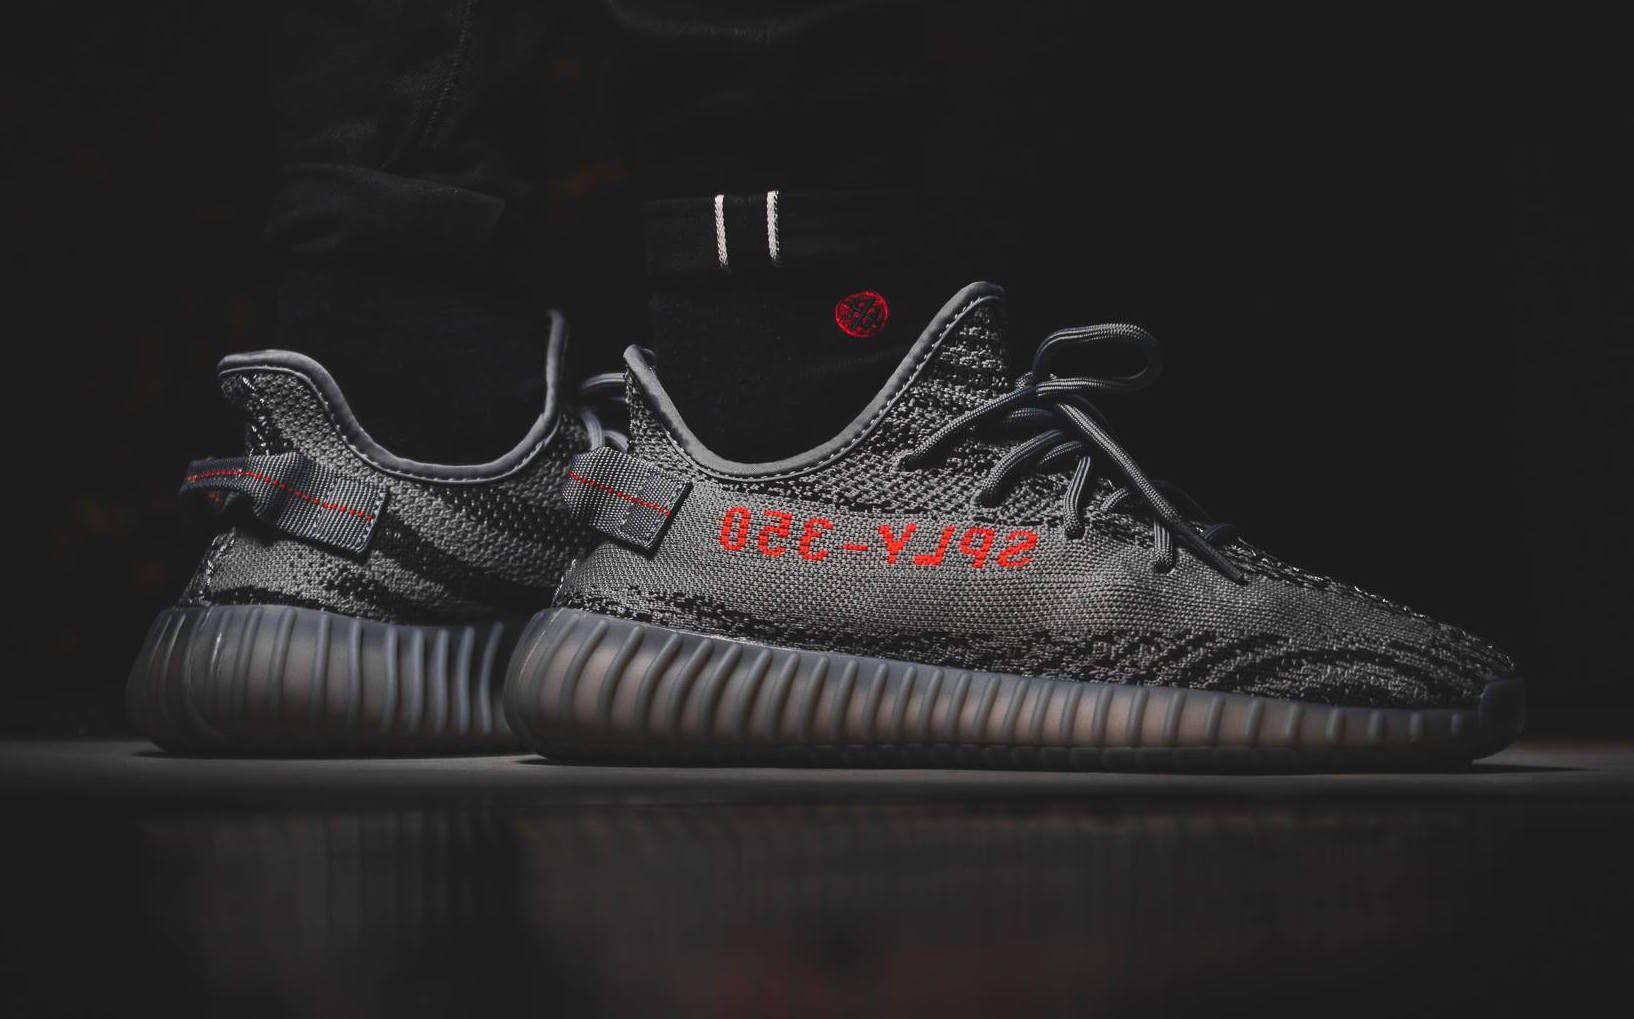 Adidas Yeezy Boost 350 V2 Wallpaper Cave